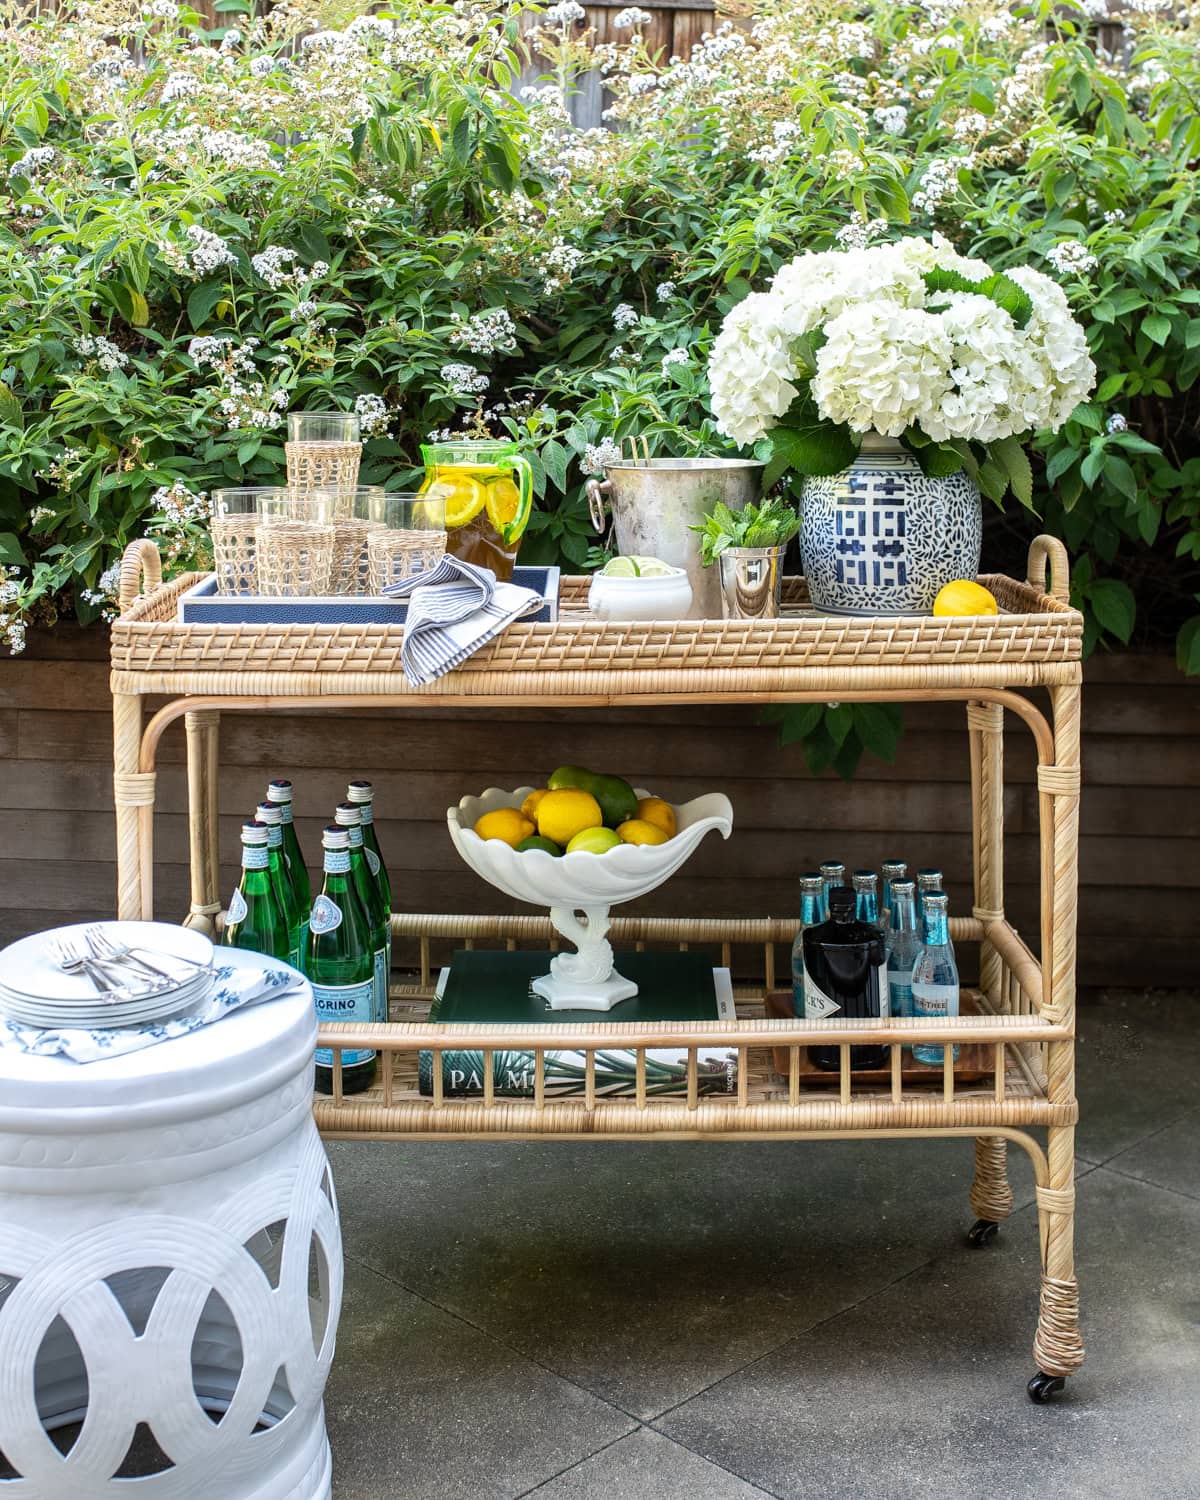 Bar cart featuring drinks and coastal decor featured in summer decor ideas